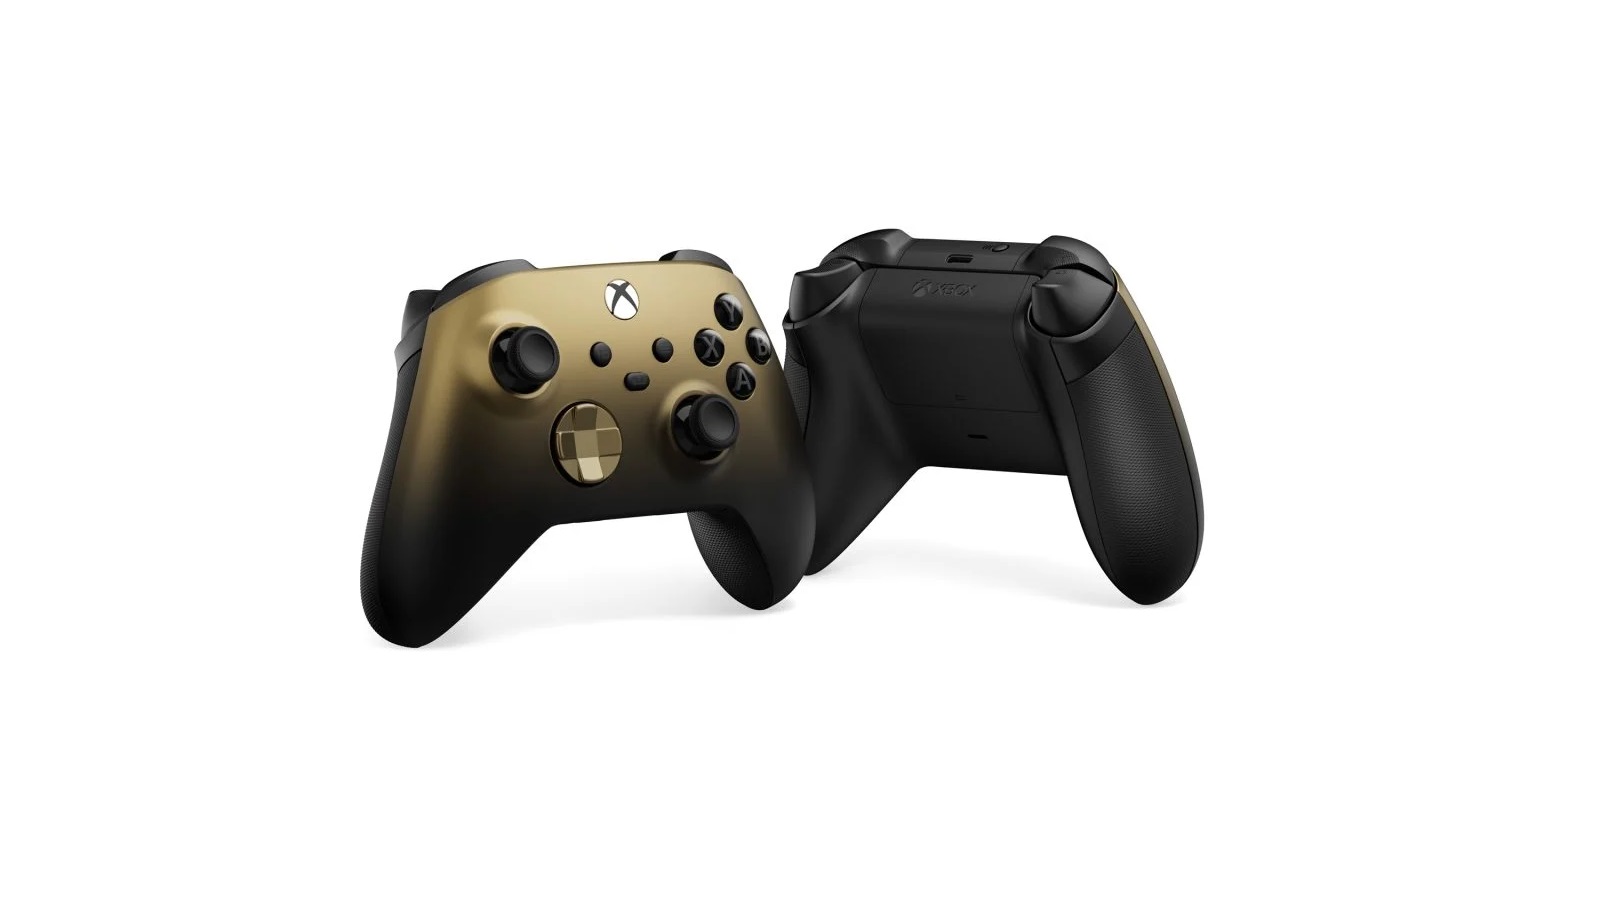 Microsoft, Xbox, Controller, Gold Shadow, Special Edition